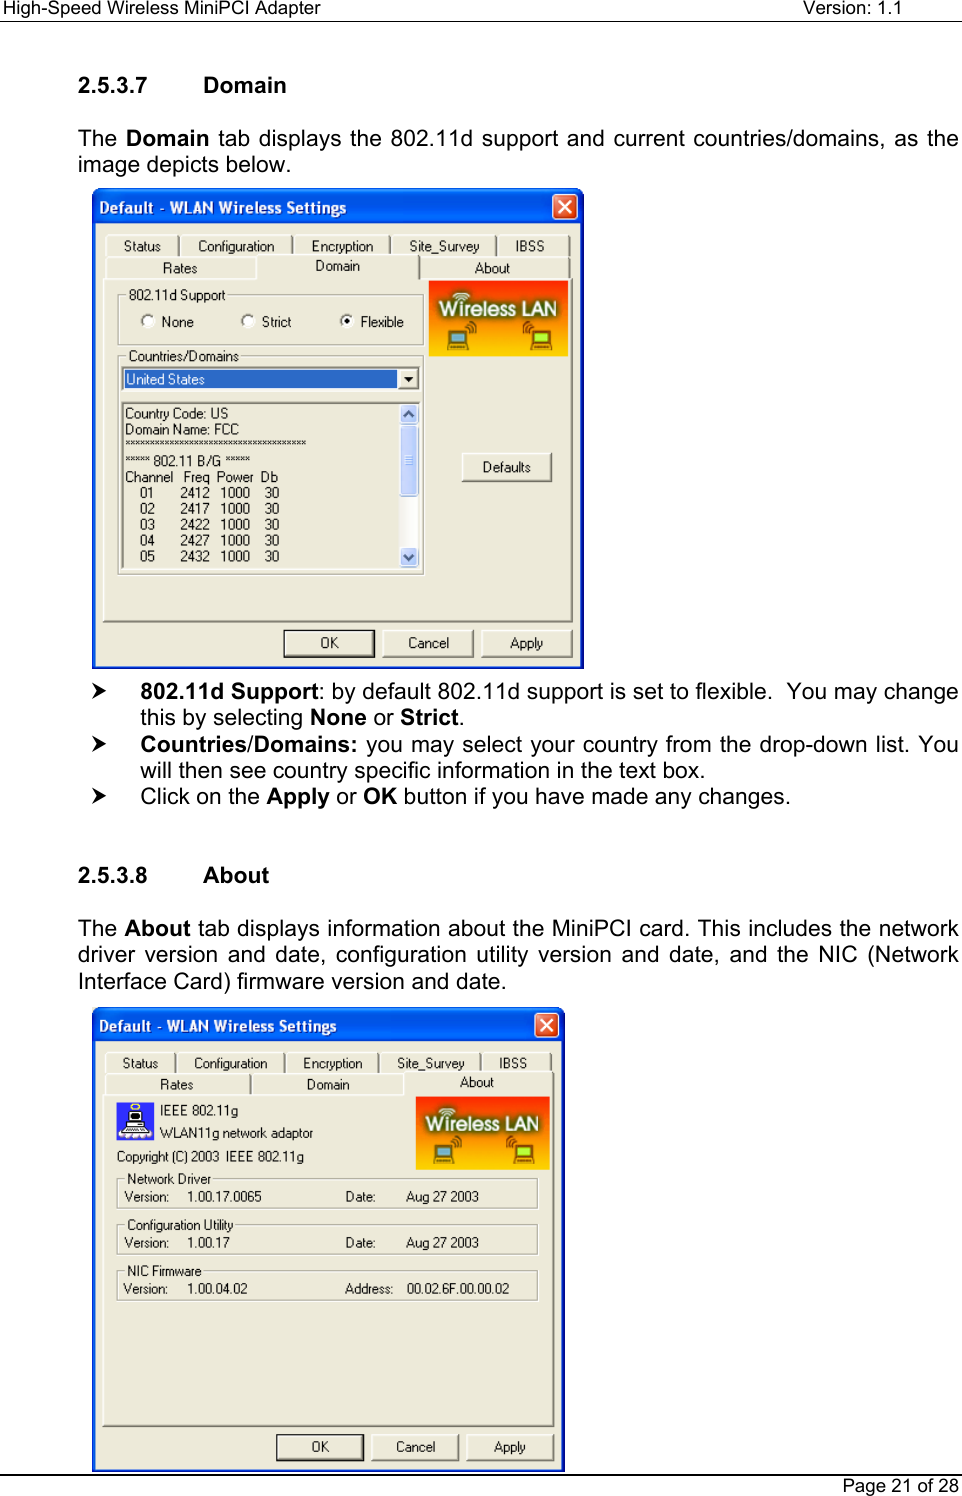 High-Speed Wireless MiniPCI Adapter Version: 1.1Page 21 of 282.5.3.7    DomainThe Domain tab displays the 802.11d support and current countries/domains, as theimage depicts below.h 802.11d Support: by default 802.11d support is set to flexible.  You may changethis by selecting None or Strict.h Countries/Domains: you may select your country from the drop-down list. Youwill then see country specific information in the text box.h  Click on the Apply or OK button if you have made any changes.2.5.3.8    AboutThe About tab displays information about the MiniPCI card. This includes the networkdriver version and date, configuration utility version and date, and the NIC (NetworkInterface Card) firmware version and date.